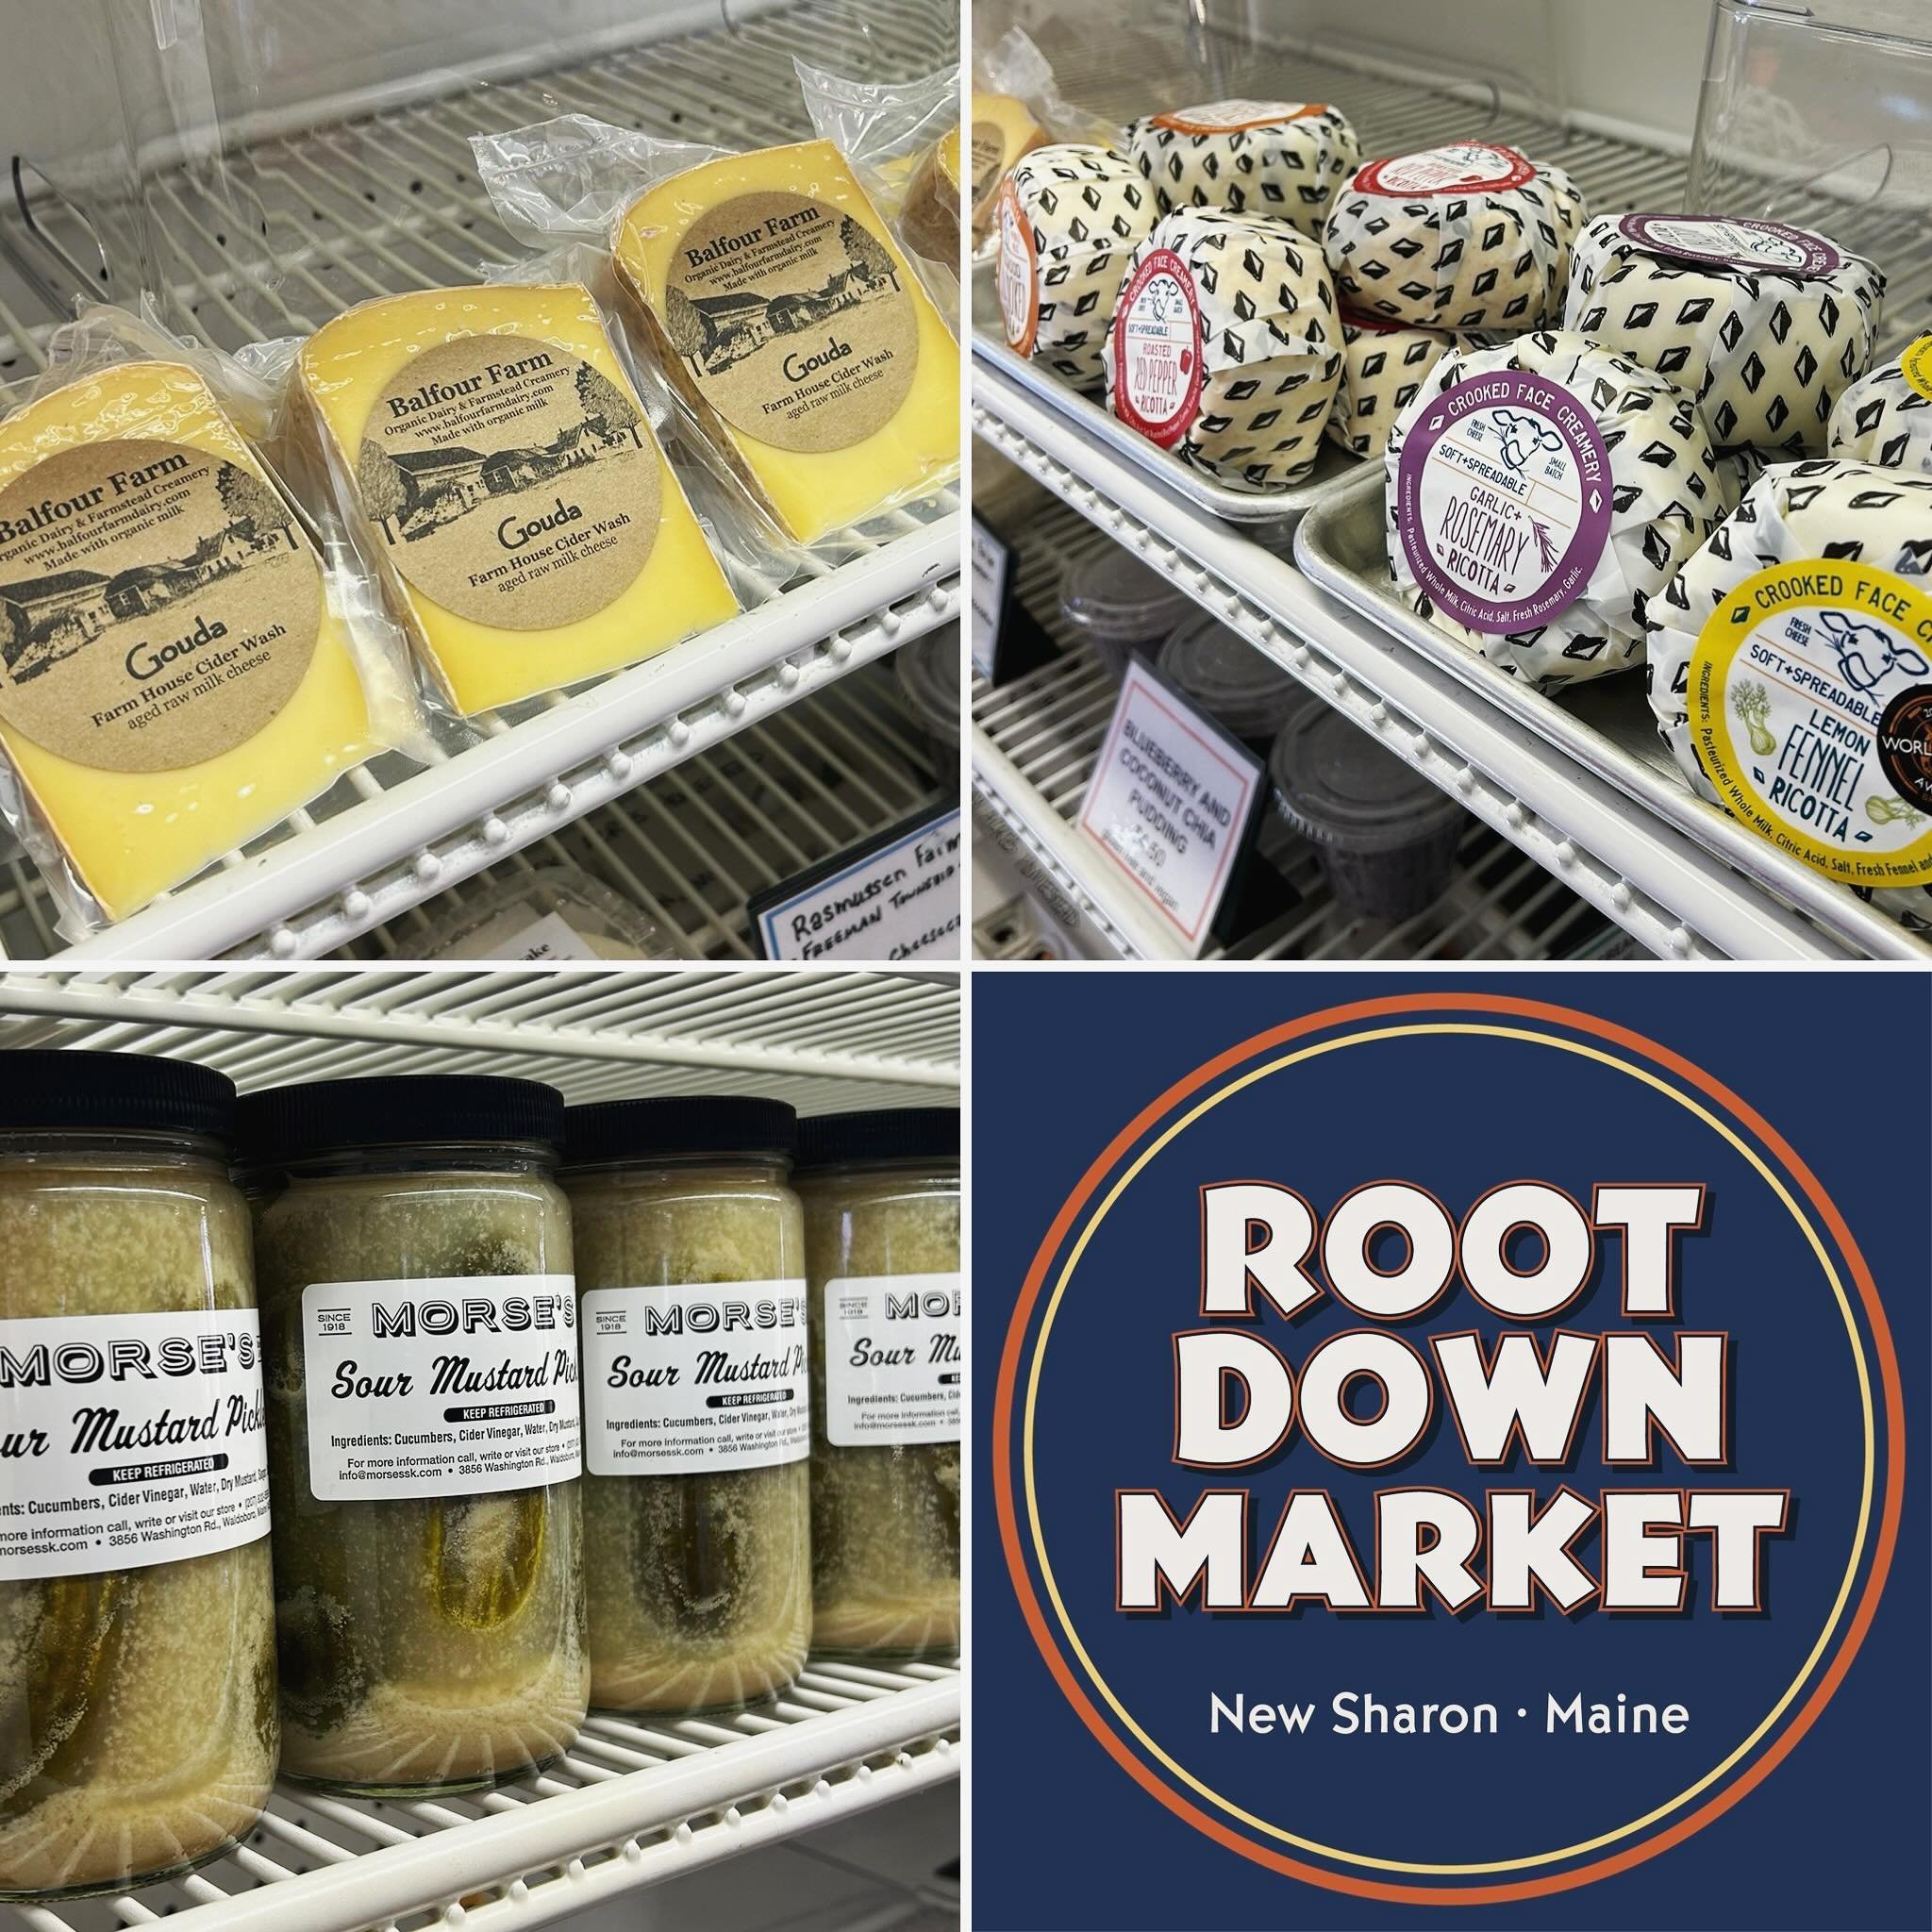 THURSDAY! Restock on some of our market favs including @balfourfarm 🧀 @morseskraut 🥒 @crookedfacecreamery and more! PLUS! Panko-fried Garlic Chile Sweet Potato Wrap and Chicken Tendies made with Pinetree Poultry chicken tenderloins! Order takeout a